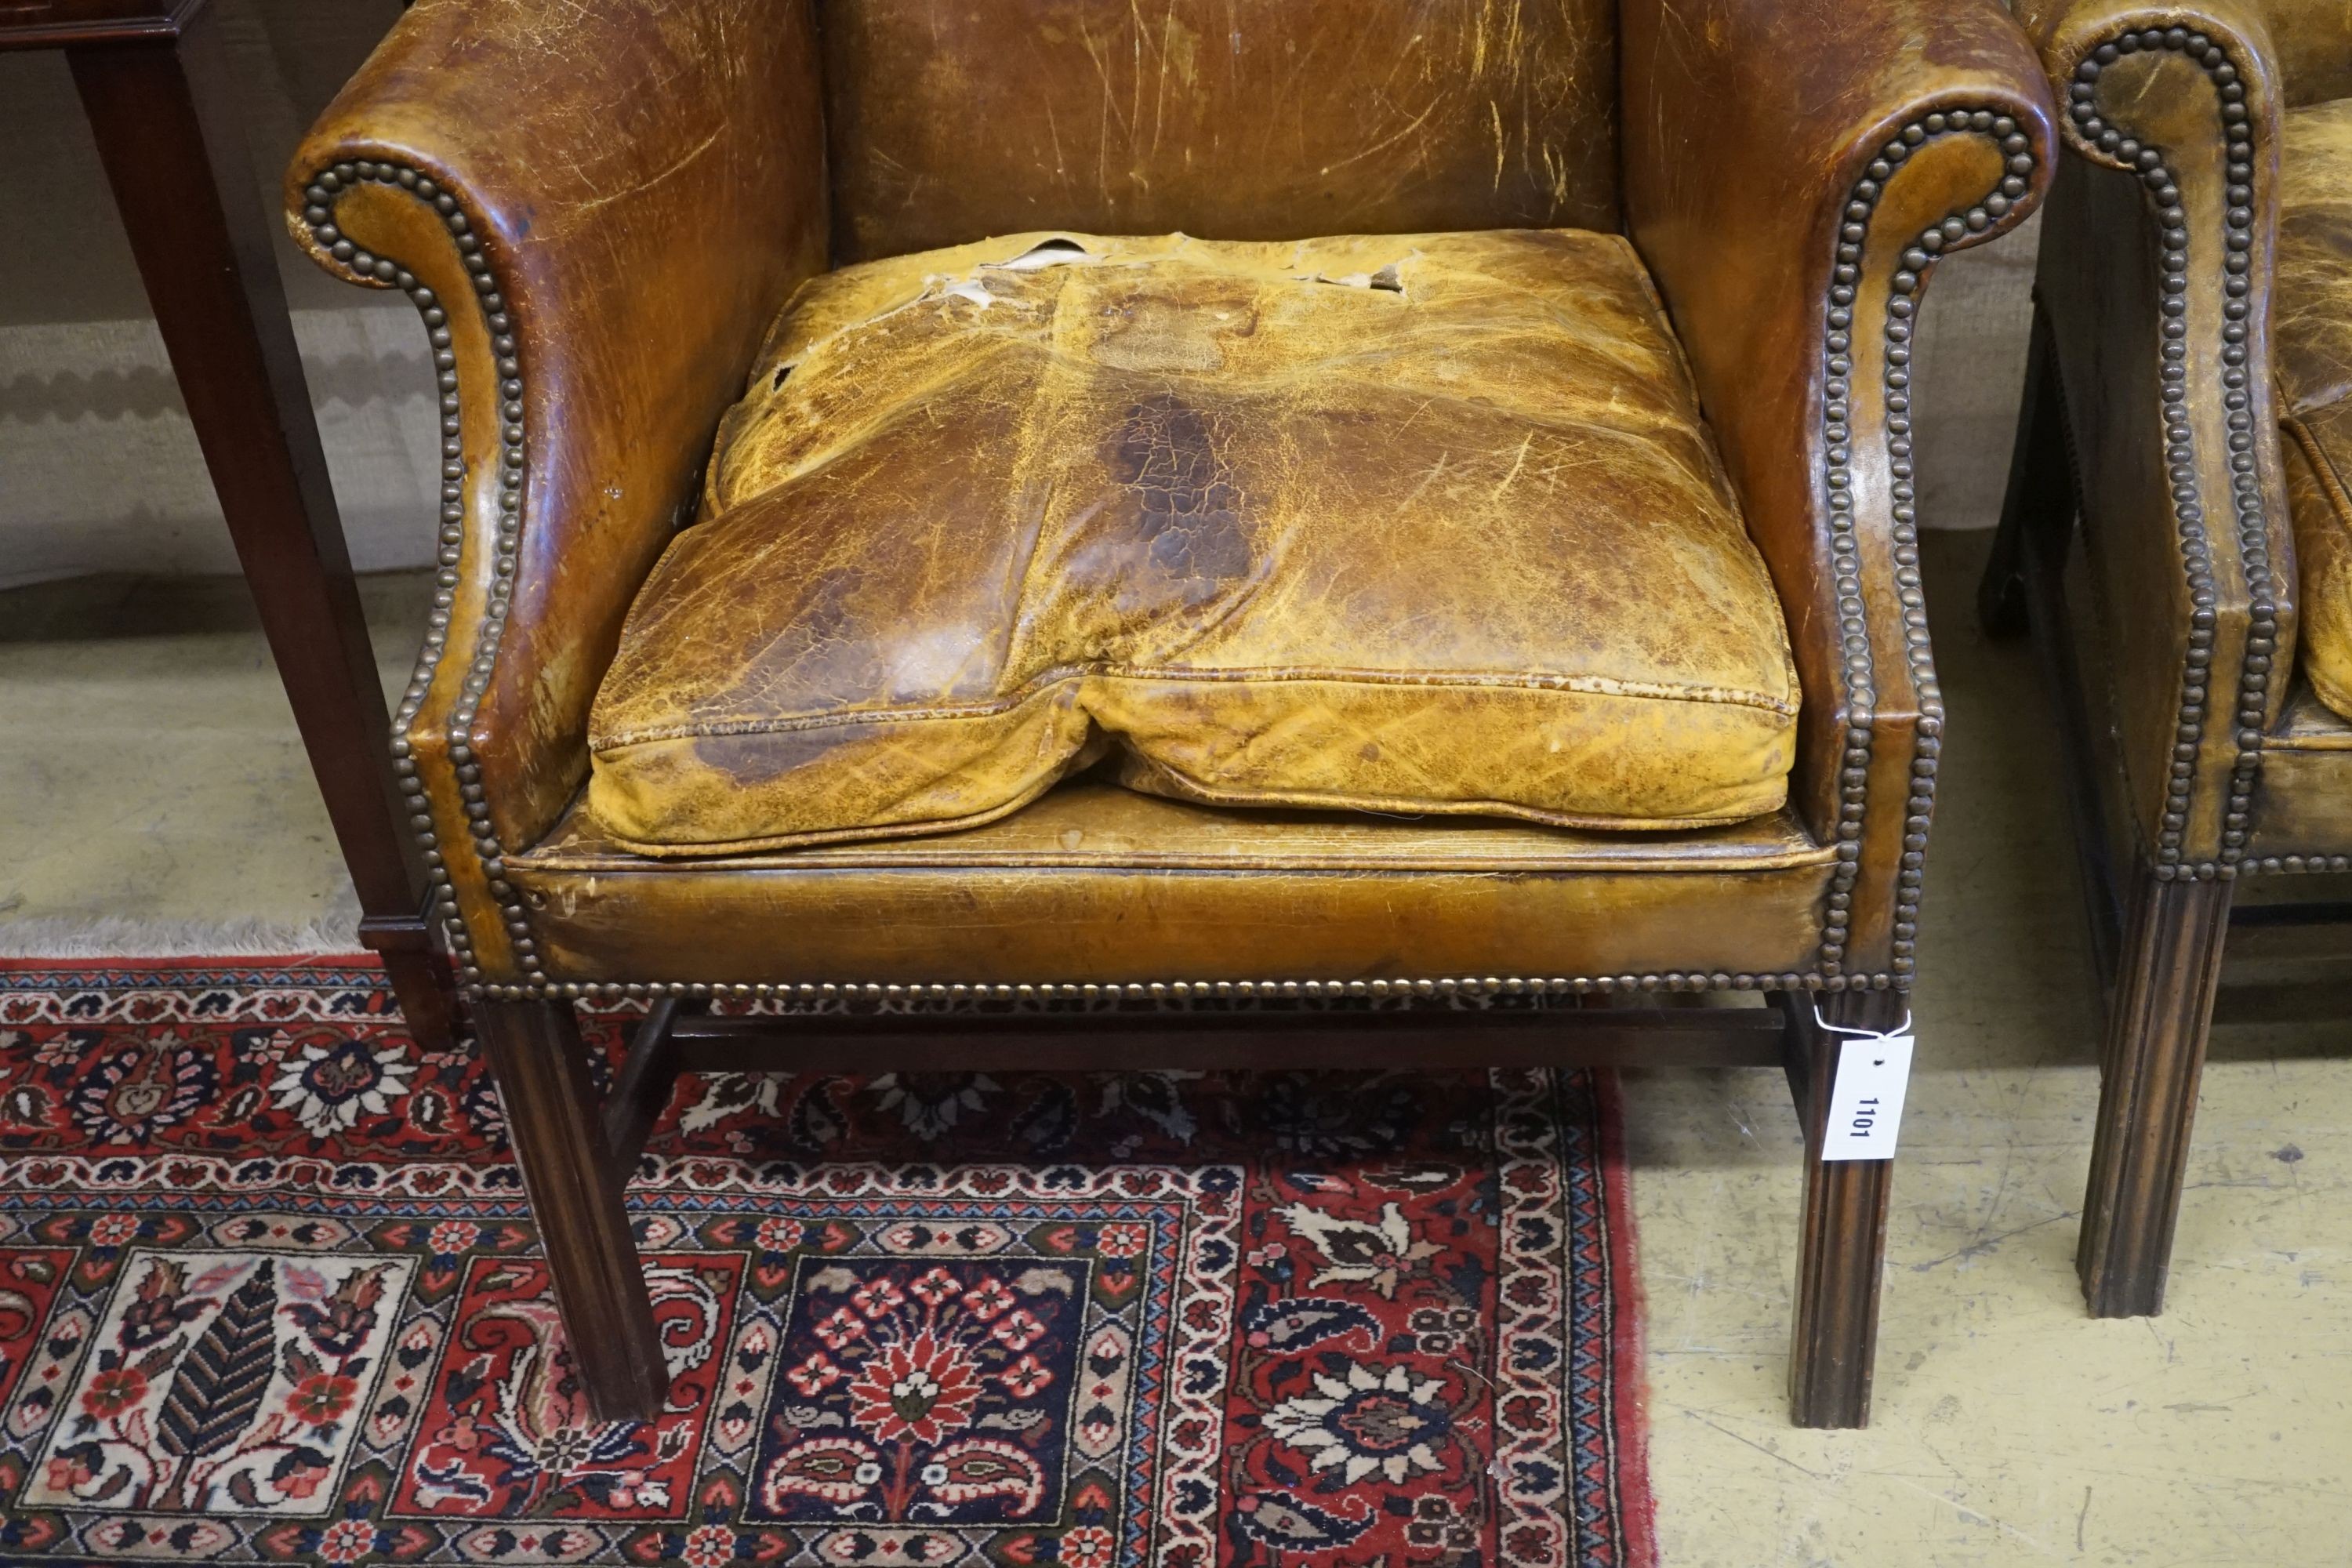 A pair of George III style tanned leather wing armchairs